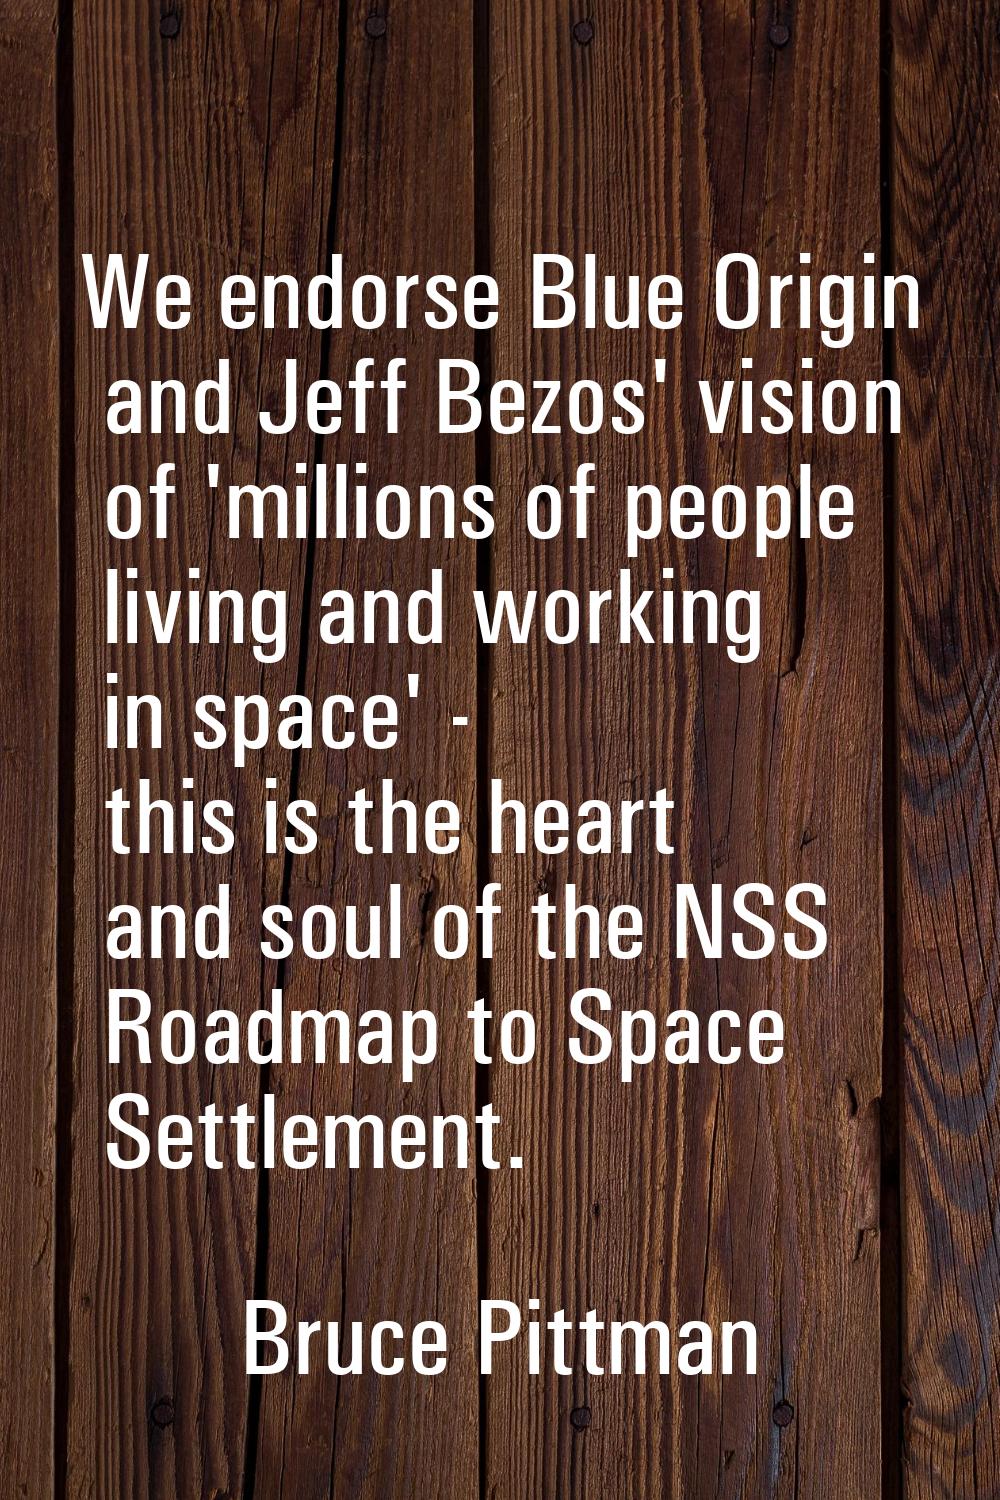 We endorse Blue Origin and Jeff Bezos' vision of 'millions of people living and working in space' -